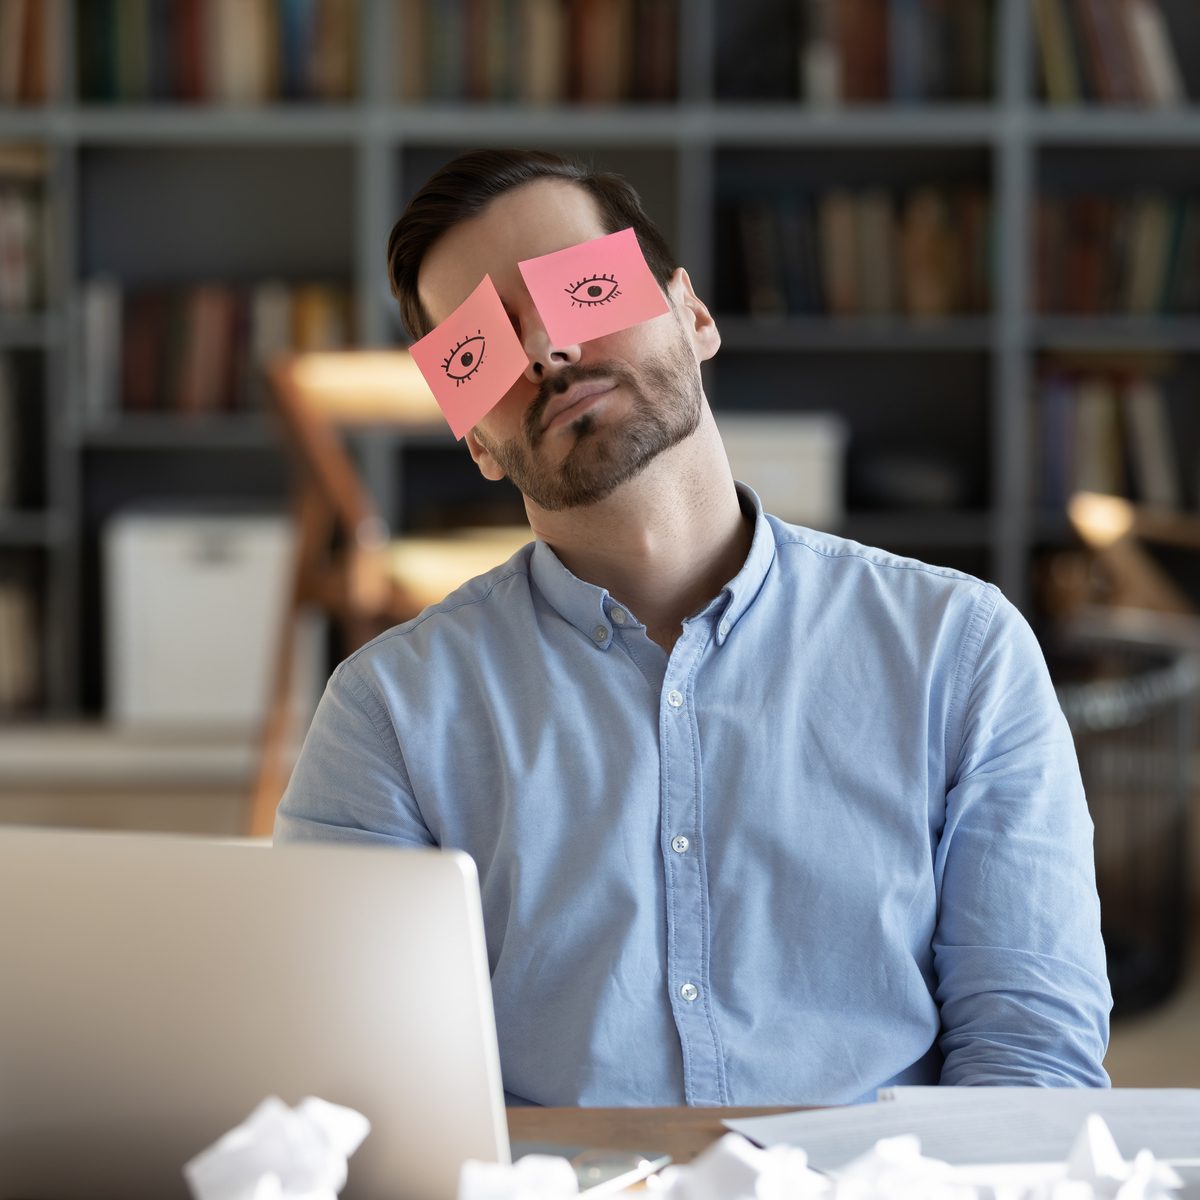 burn-out recovery represented by man asleep at his desk with sticky note eyeballs on his face